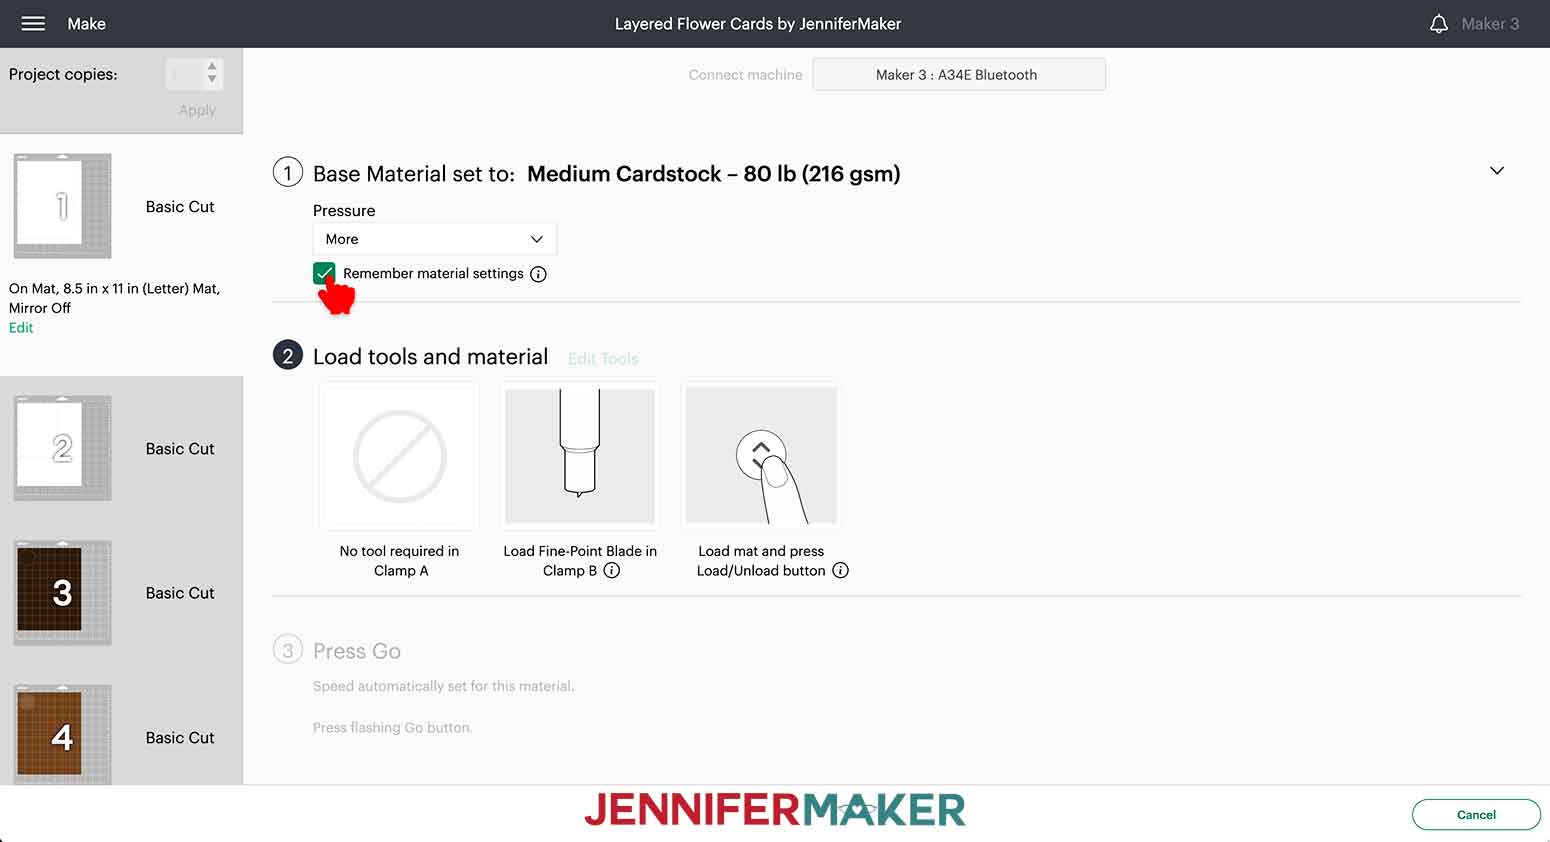 Select "Medium Cardstock - 80lb" for the base material and select more pressure. Also select "Remember material settings."